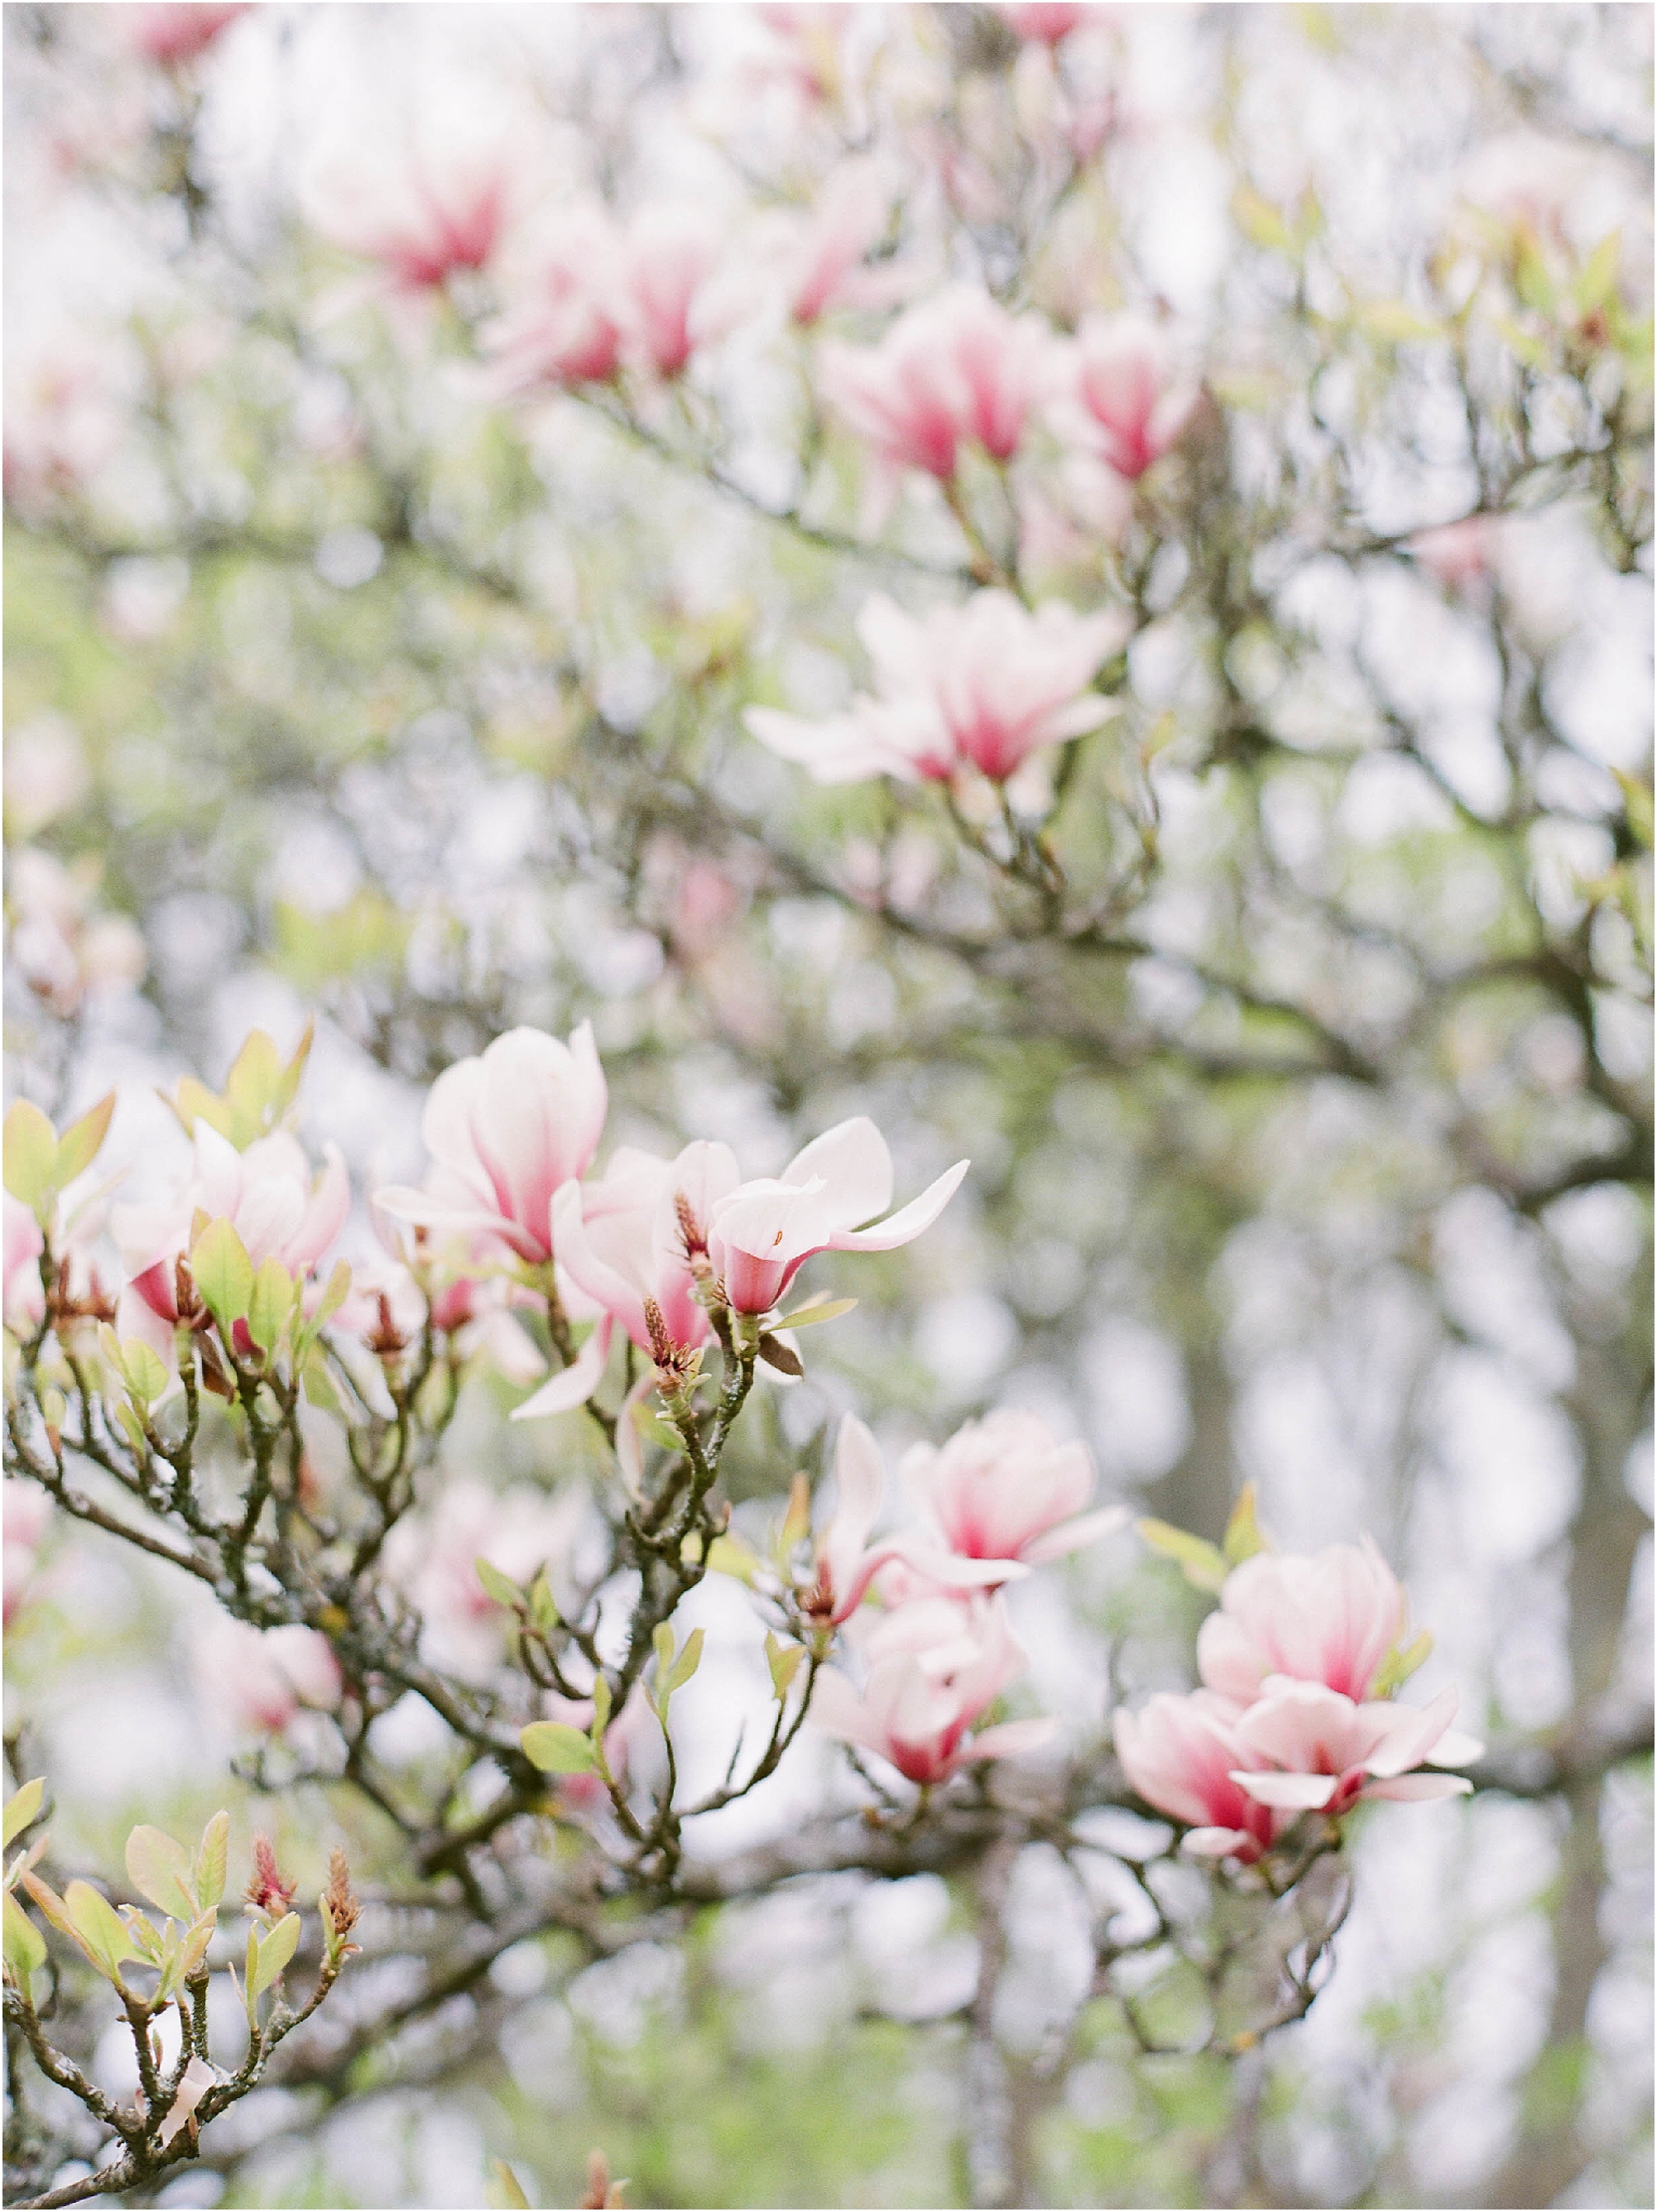 Magnolia flowers captured by Camilla Arnhold Photography